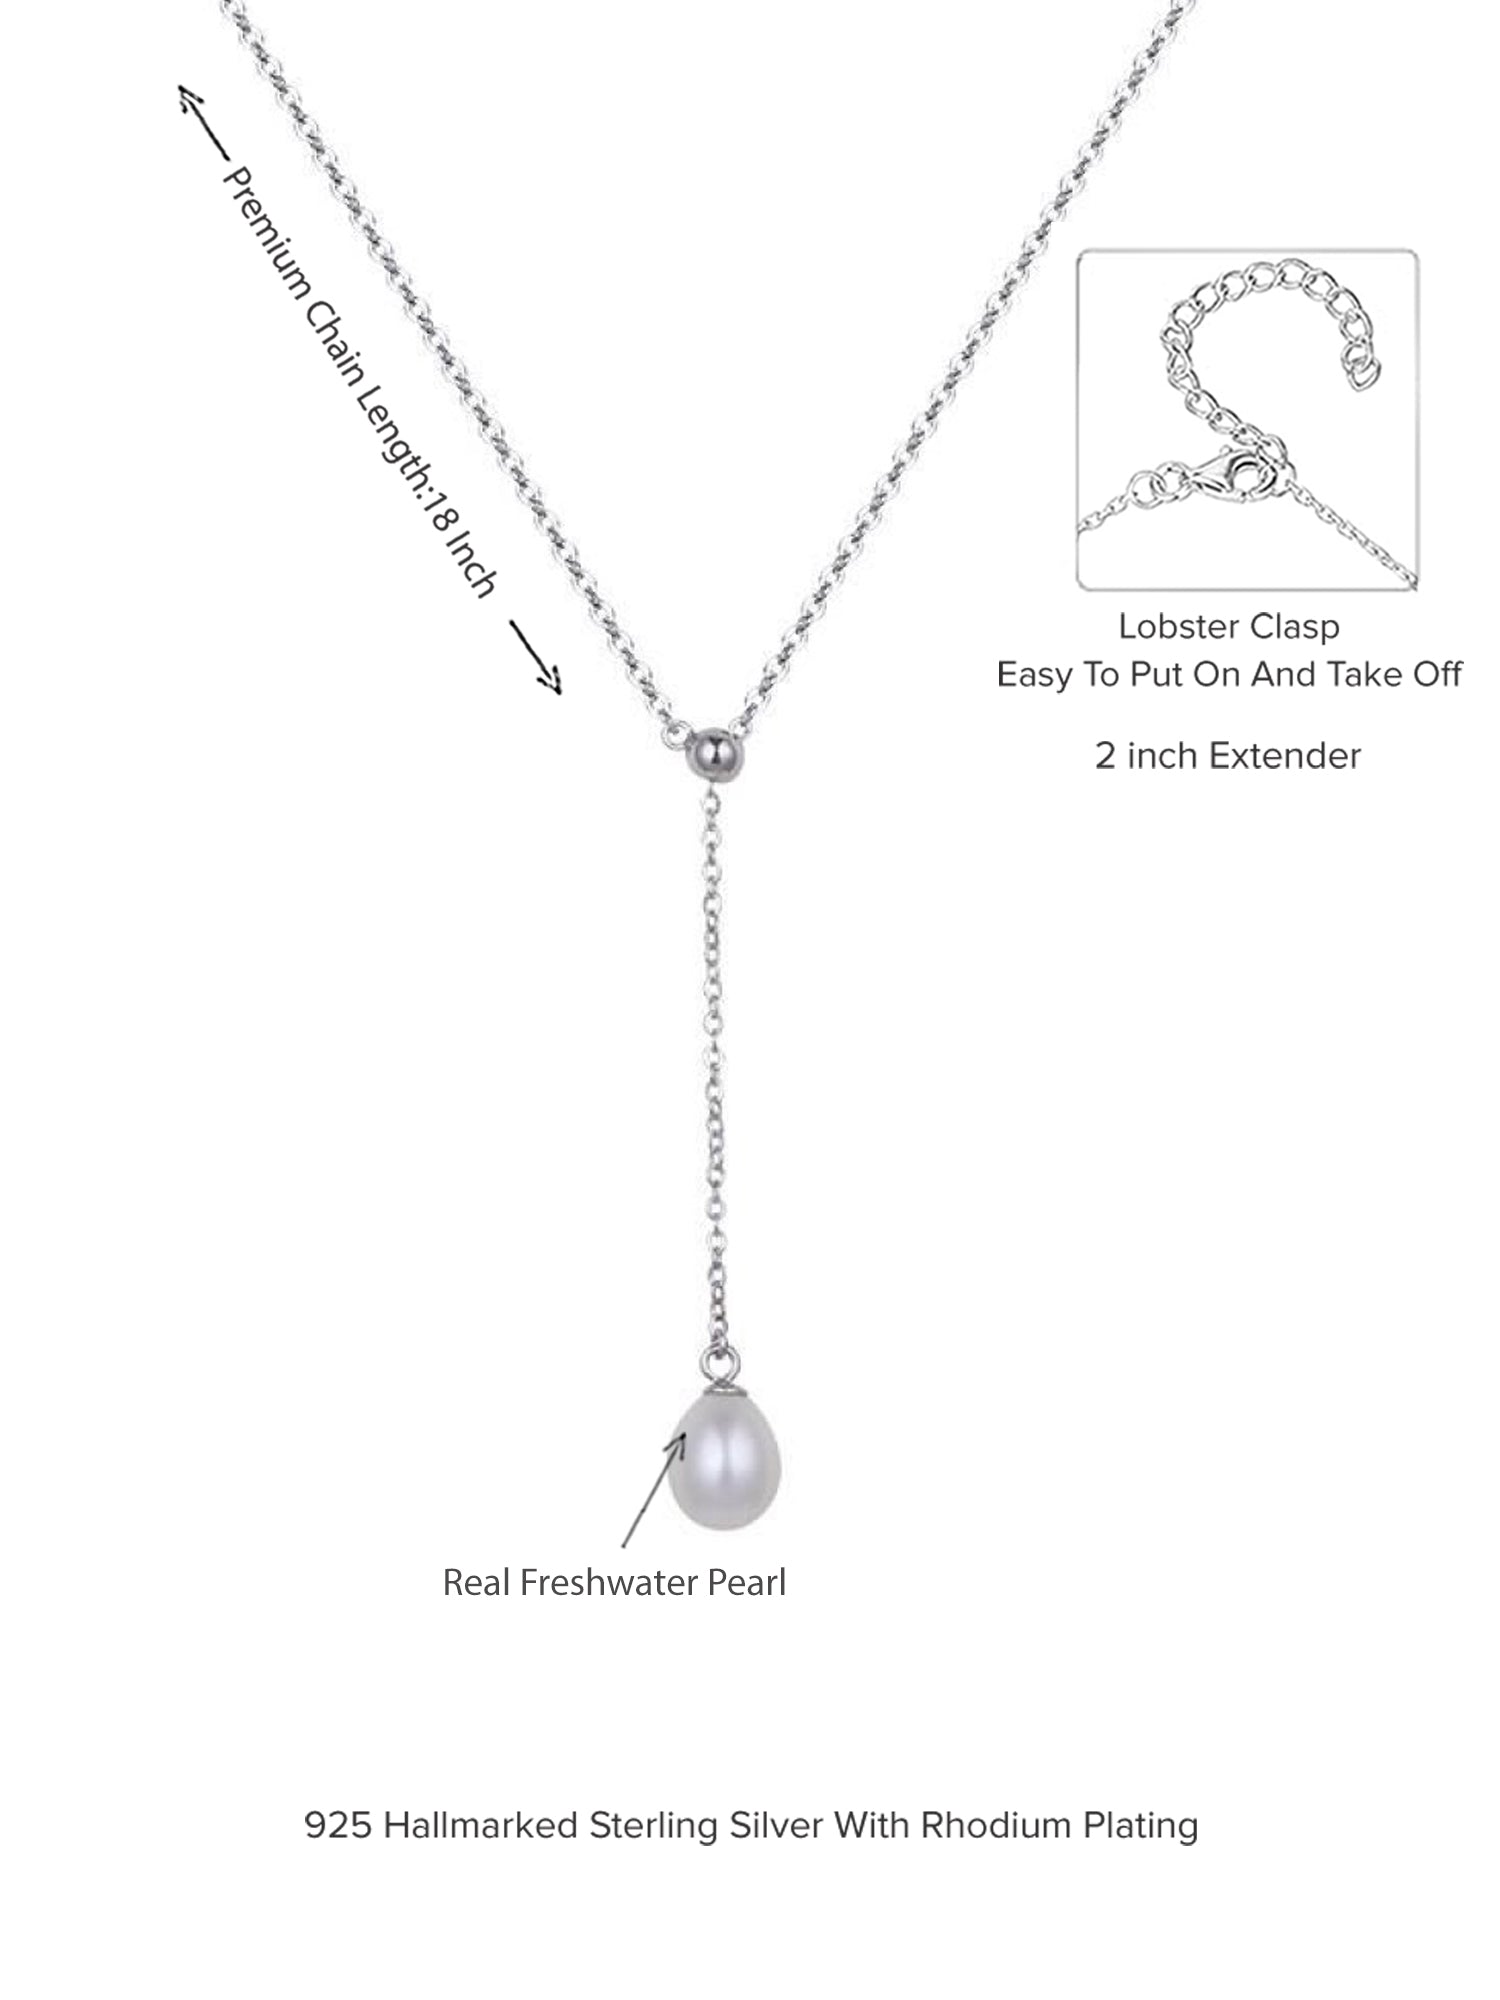 PEARL DROP STERLING SILVER 18 INCHES LARIAT NECKLACE-6